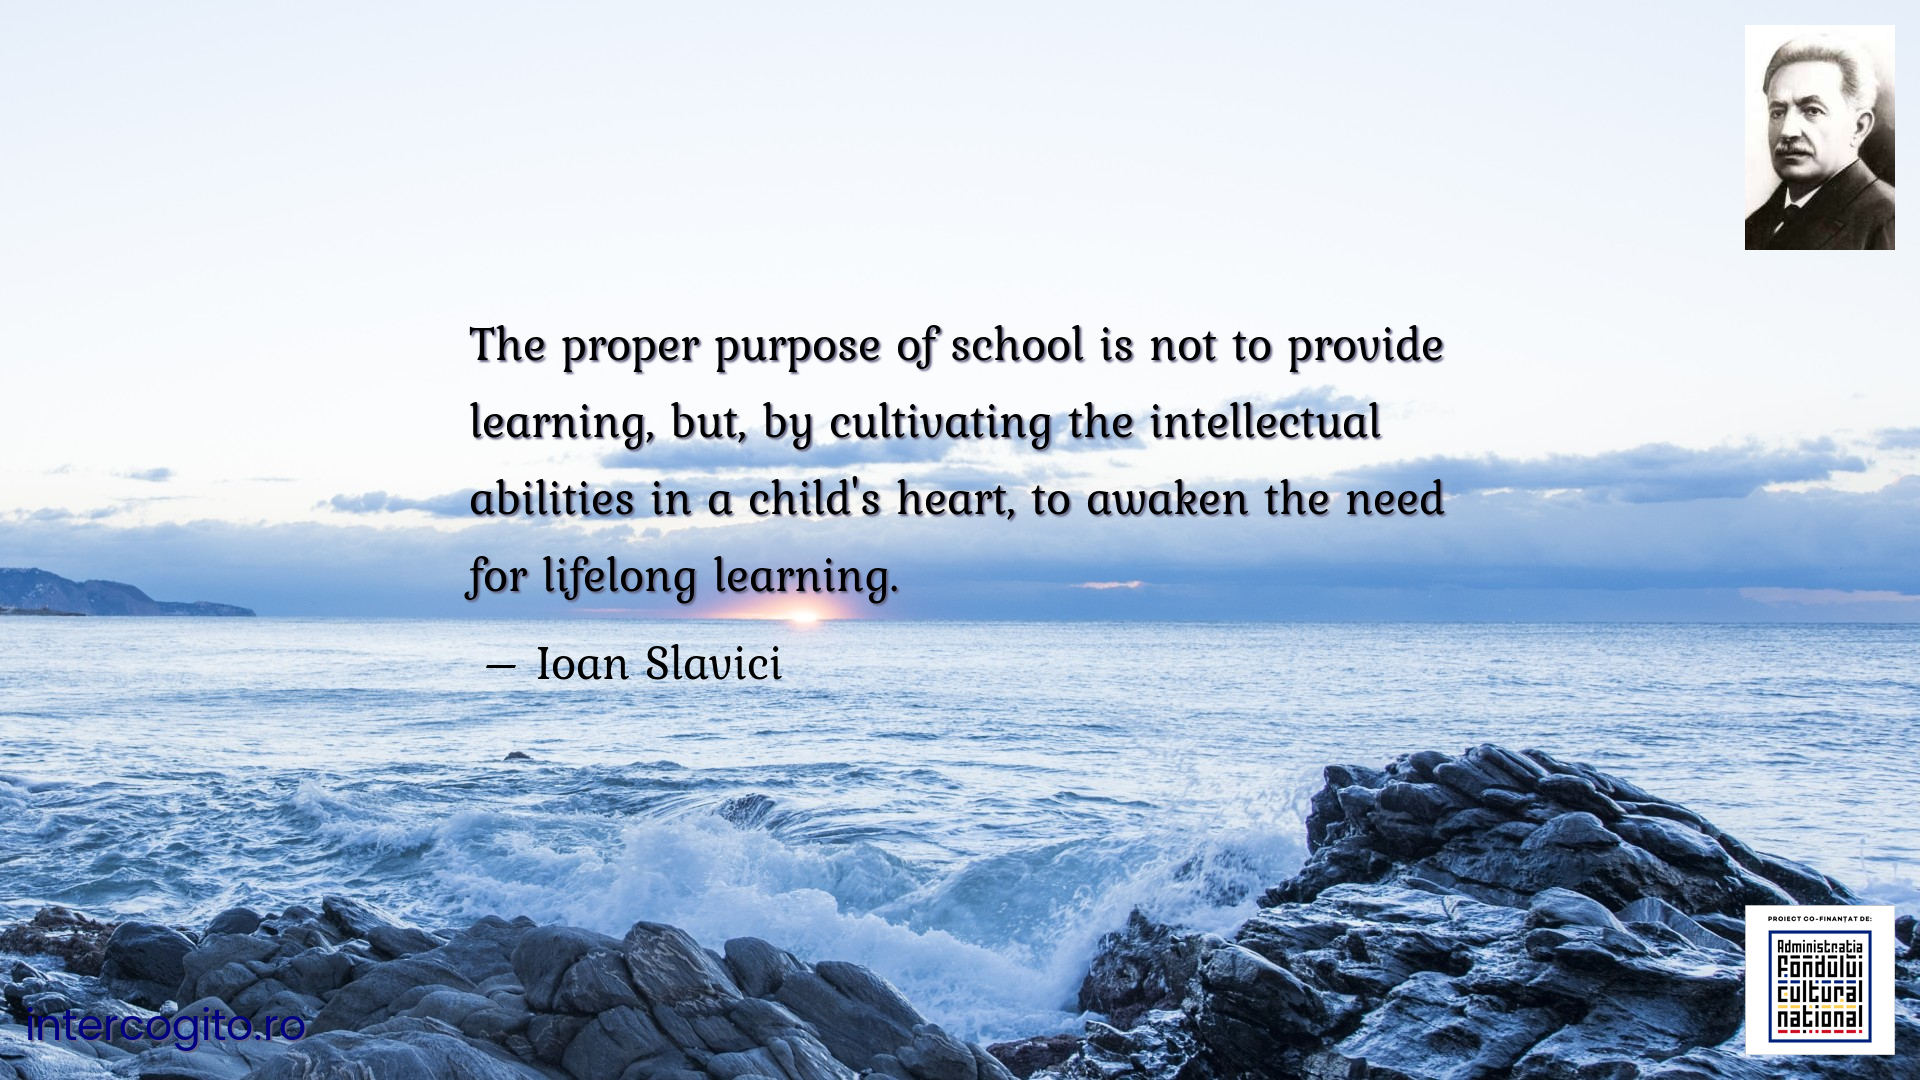 The proper purpose of school is not to provide learning, but, by cultivating the intellectual abilities in a child's heart, to awaken the need for lifelong learning.